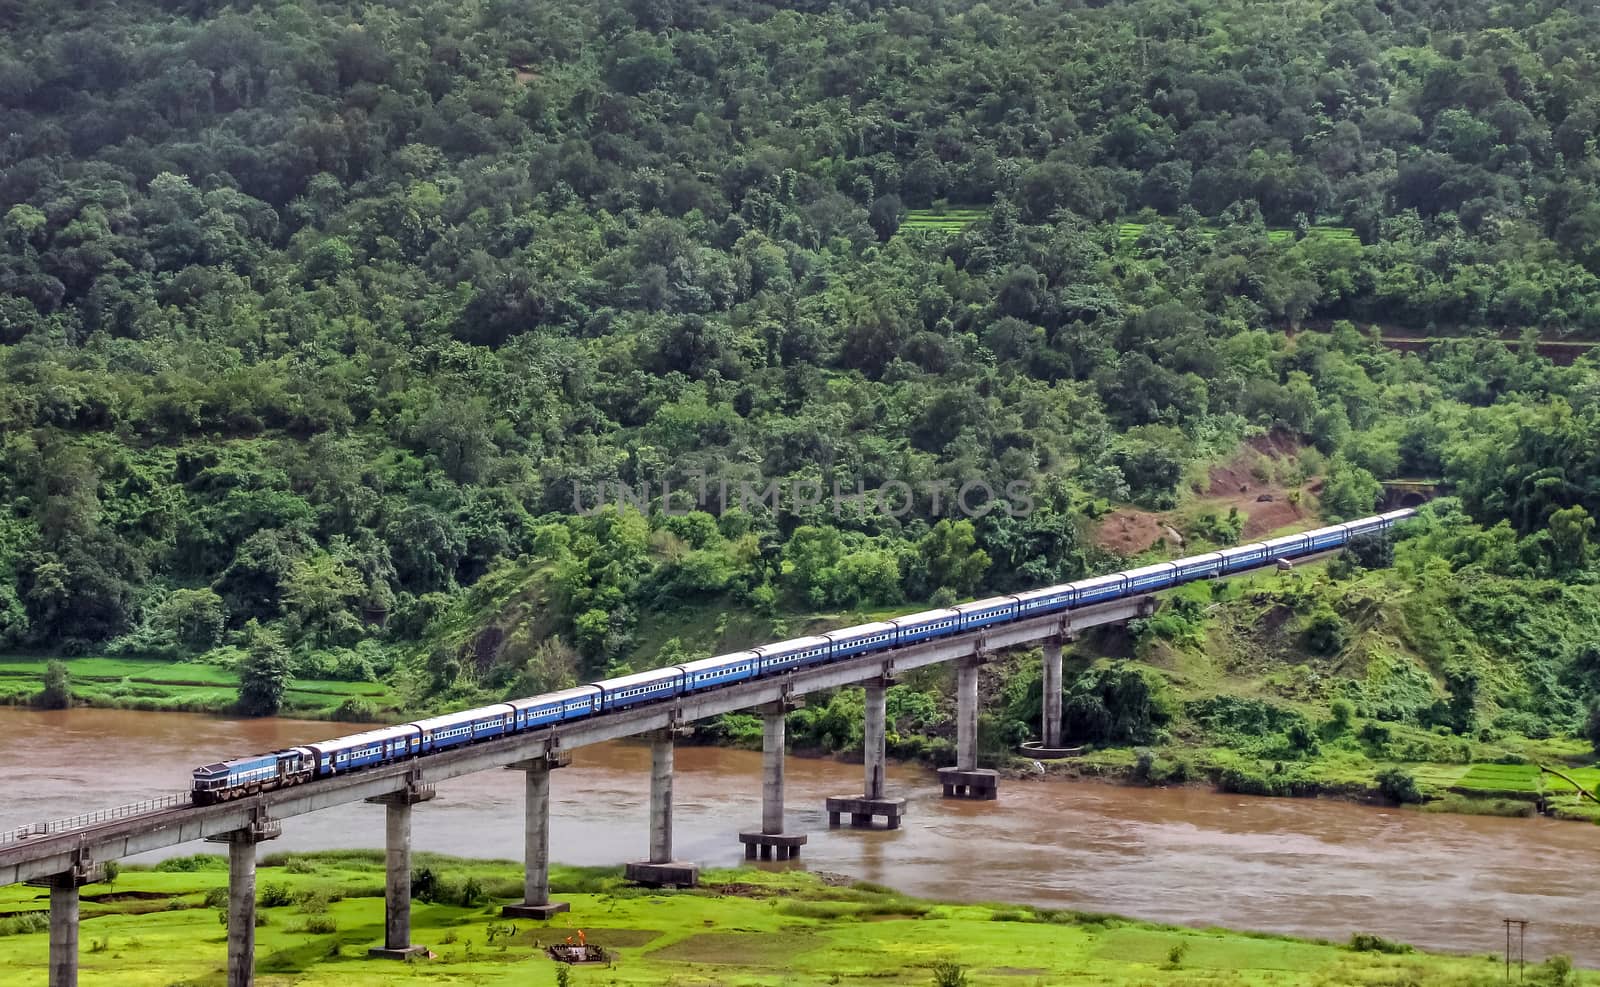 Scenic view of a train exiting tunnel and crossing bridge near Sangameshwar, India.